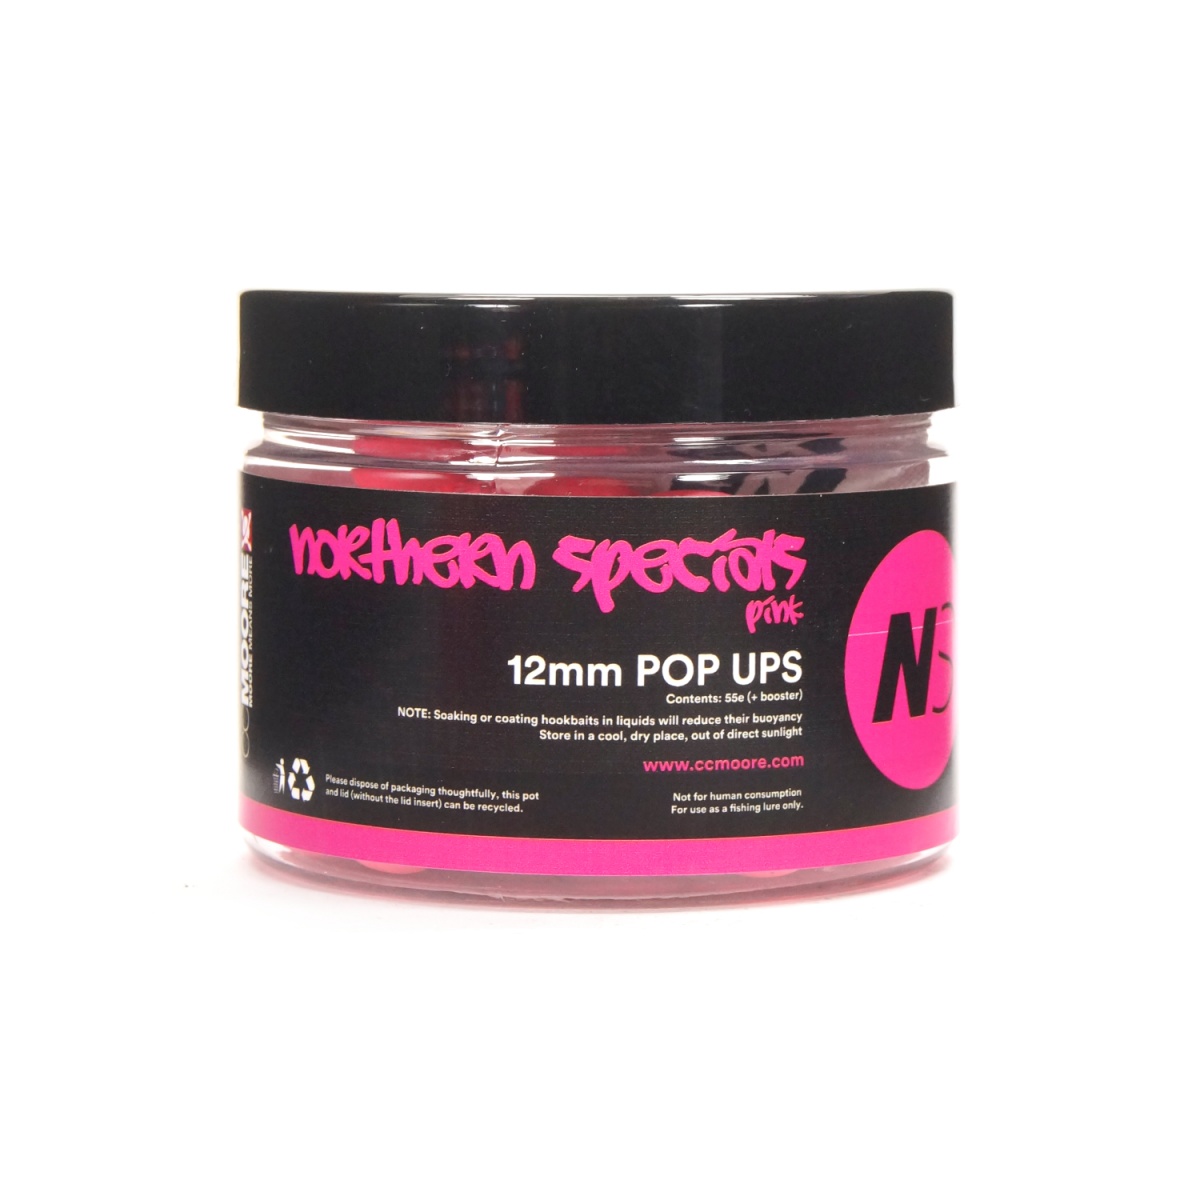 CcMoore Northern Special NS1 Pink Pop Ups 12 mm rozmiar